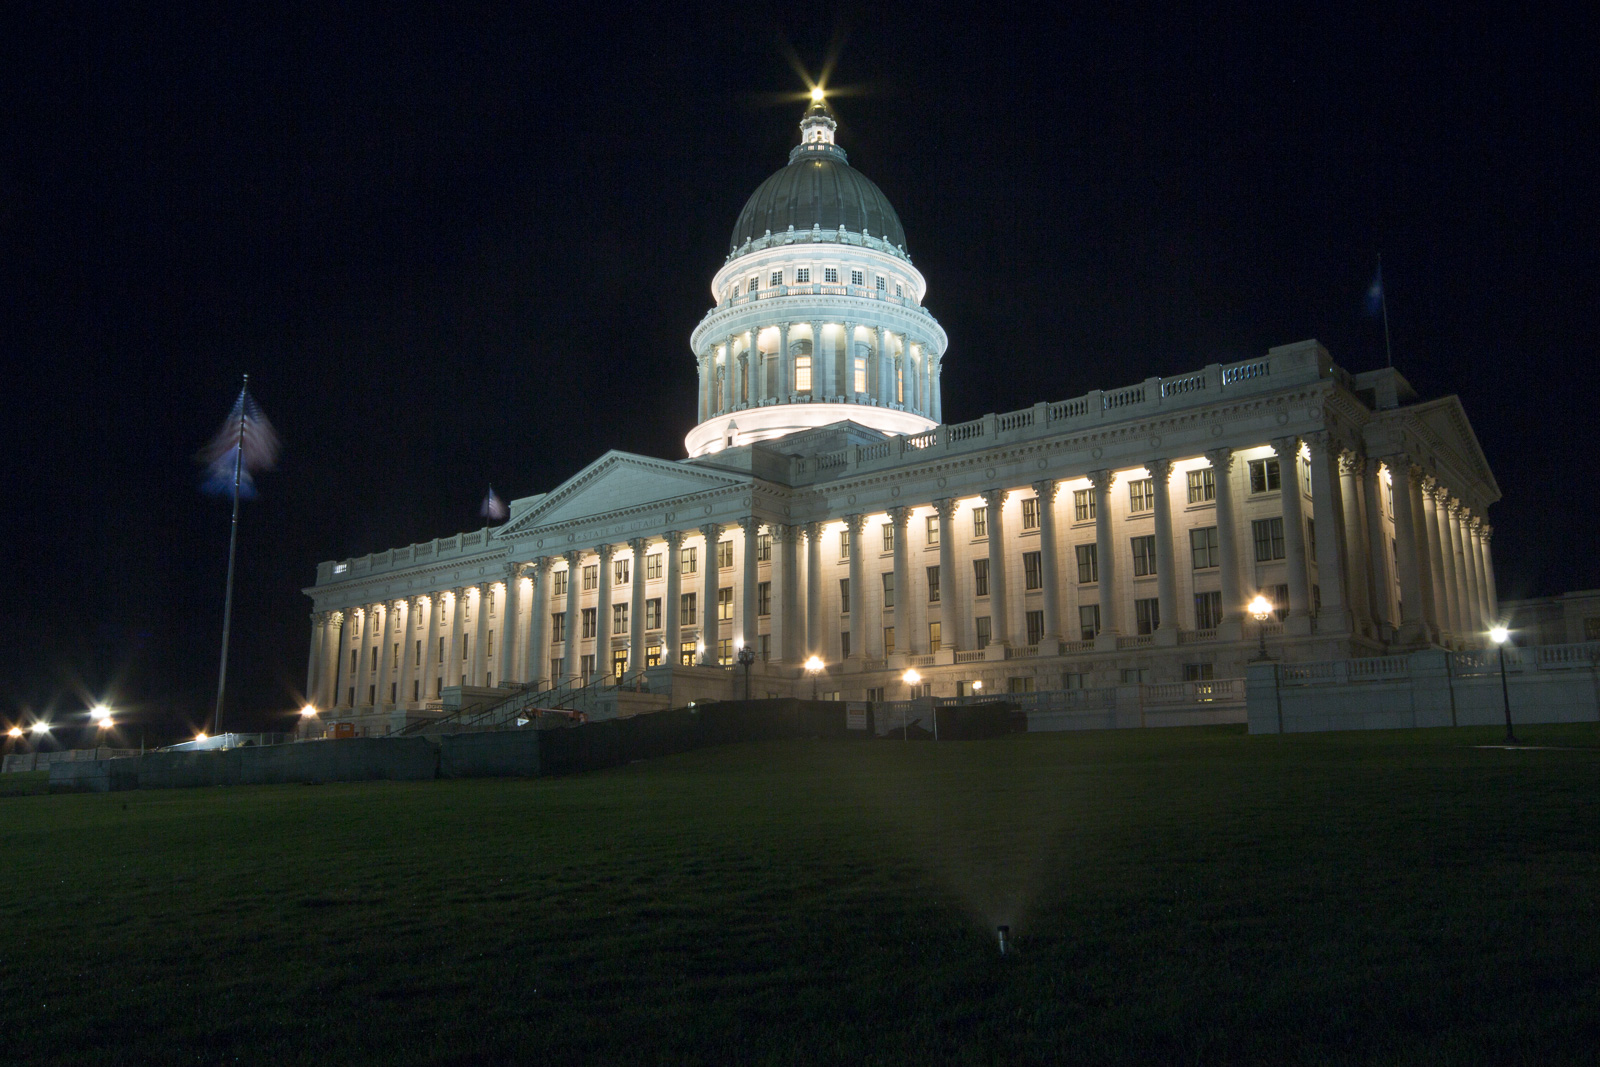 A 20 second exposure of the Utah State Capitol, September, 2015.